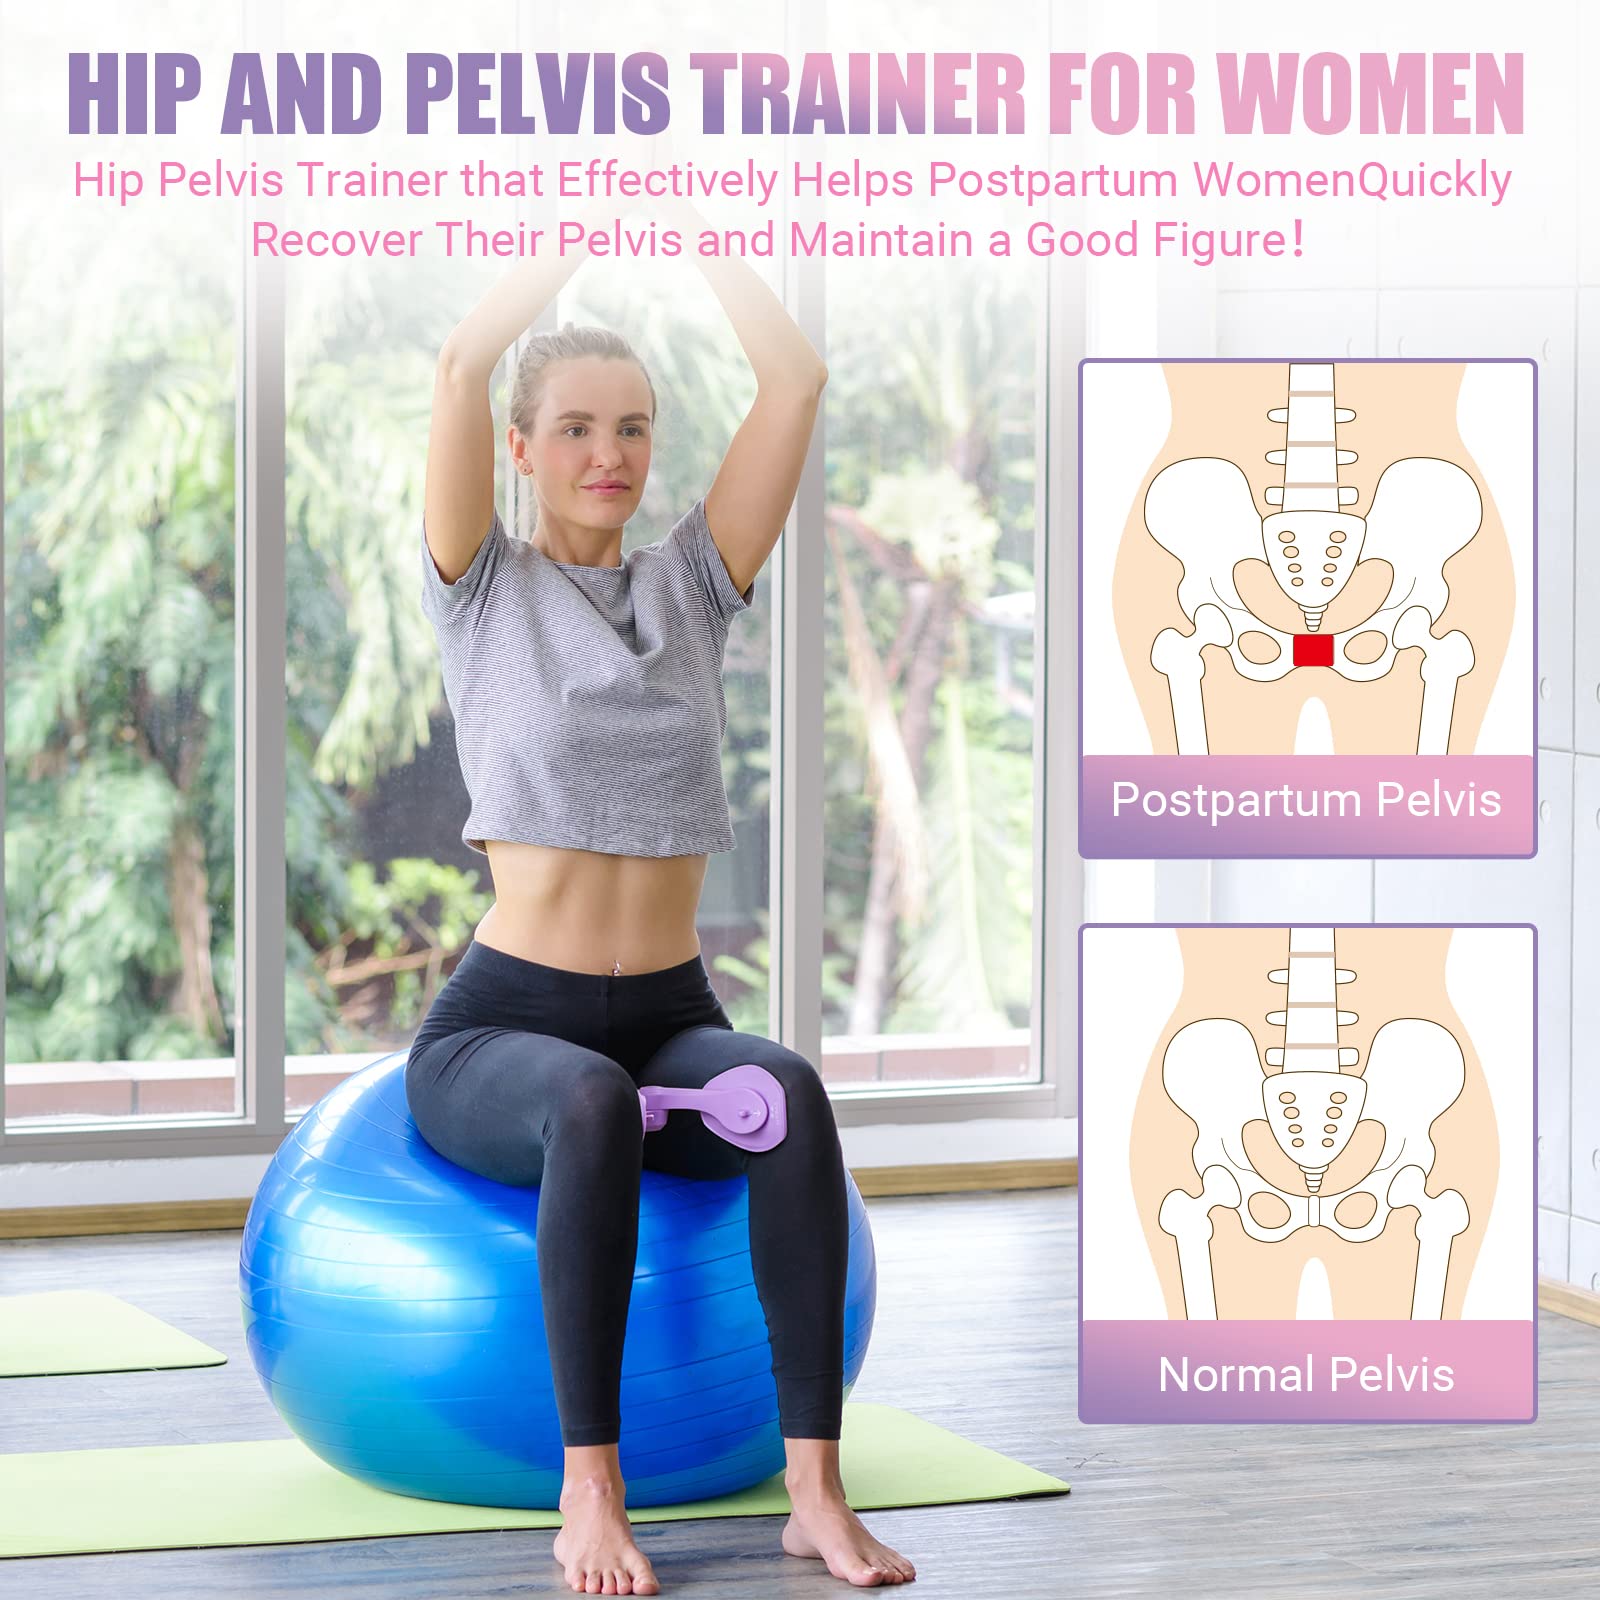 Thigh Master Thigh Exerciser for Women, Enhanced Resistance Hip and Pelvis Trainer, Inner Thigh Exercise Equipment Kegel Exercise Products for Women Home Gym